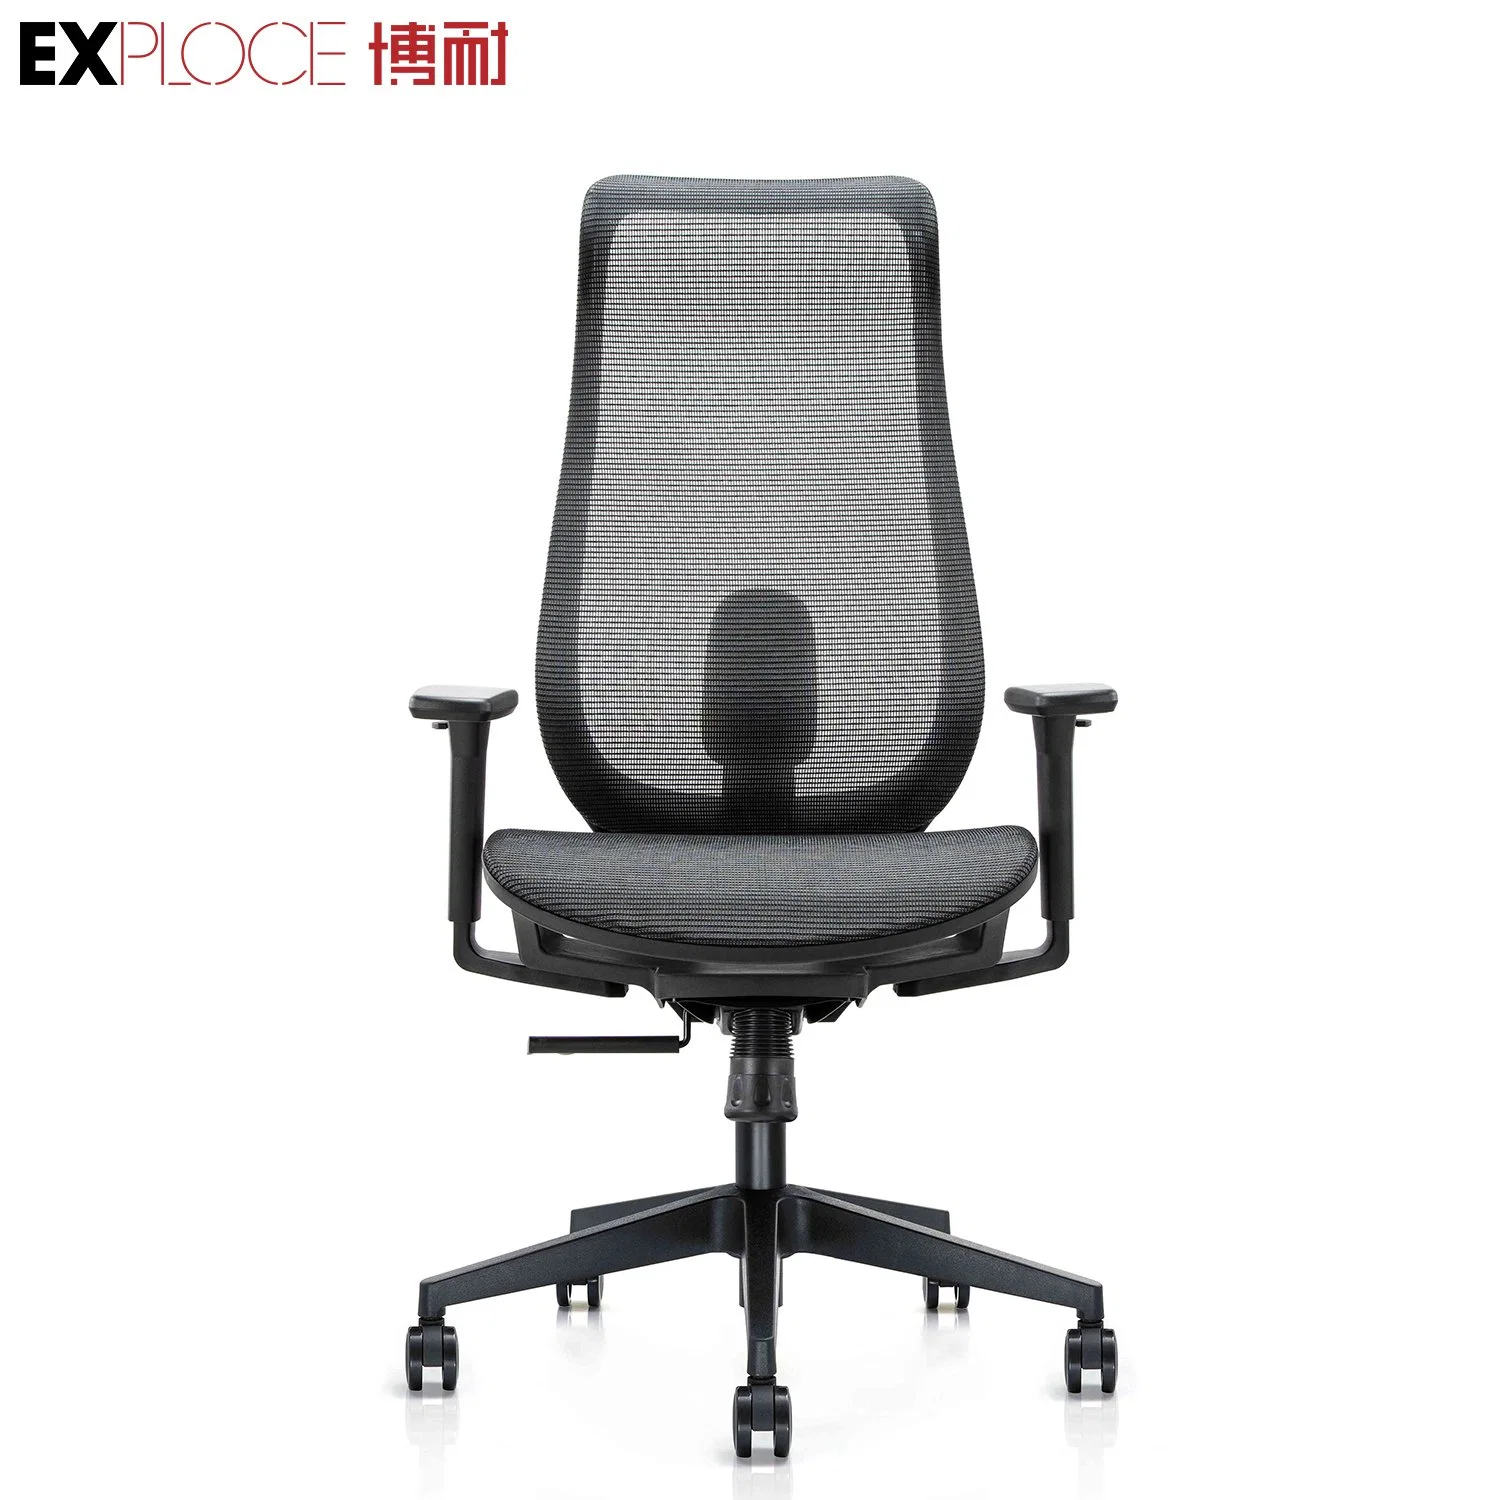 New Approved BIFMA Table Chair Chairs Computer Parts Office Furniture with High Quality